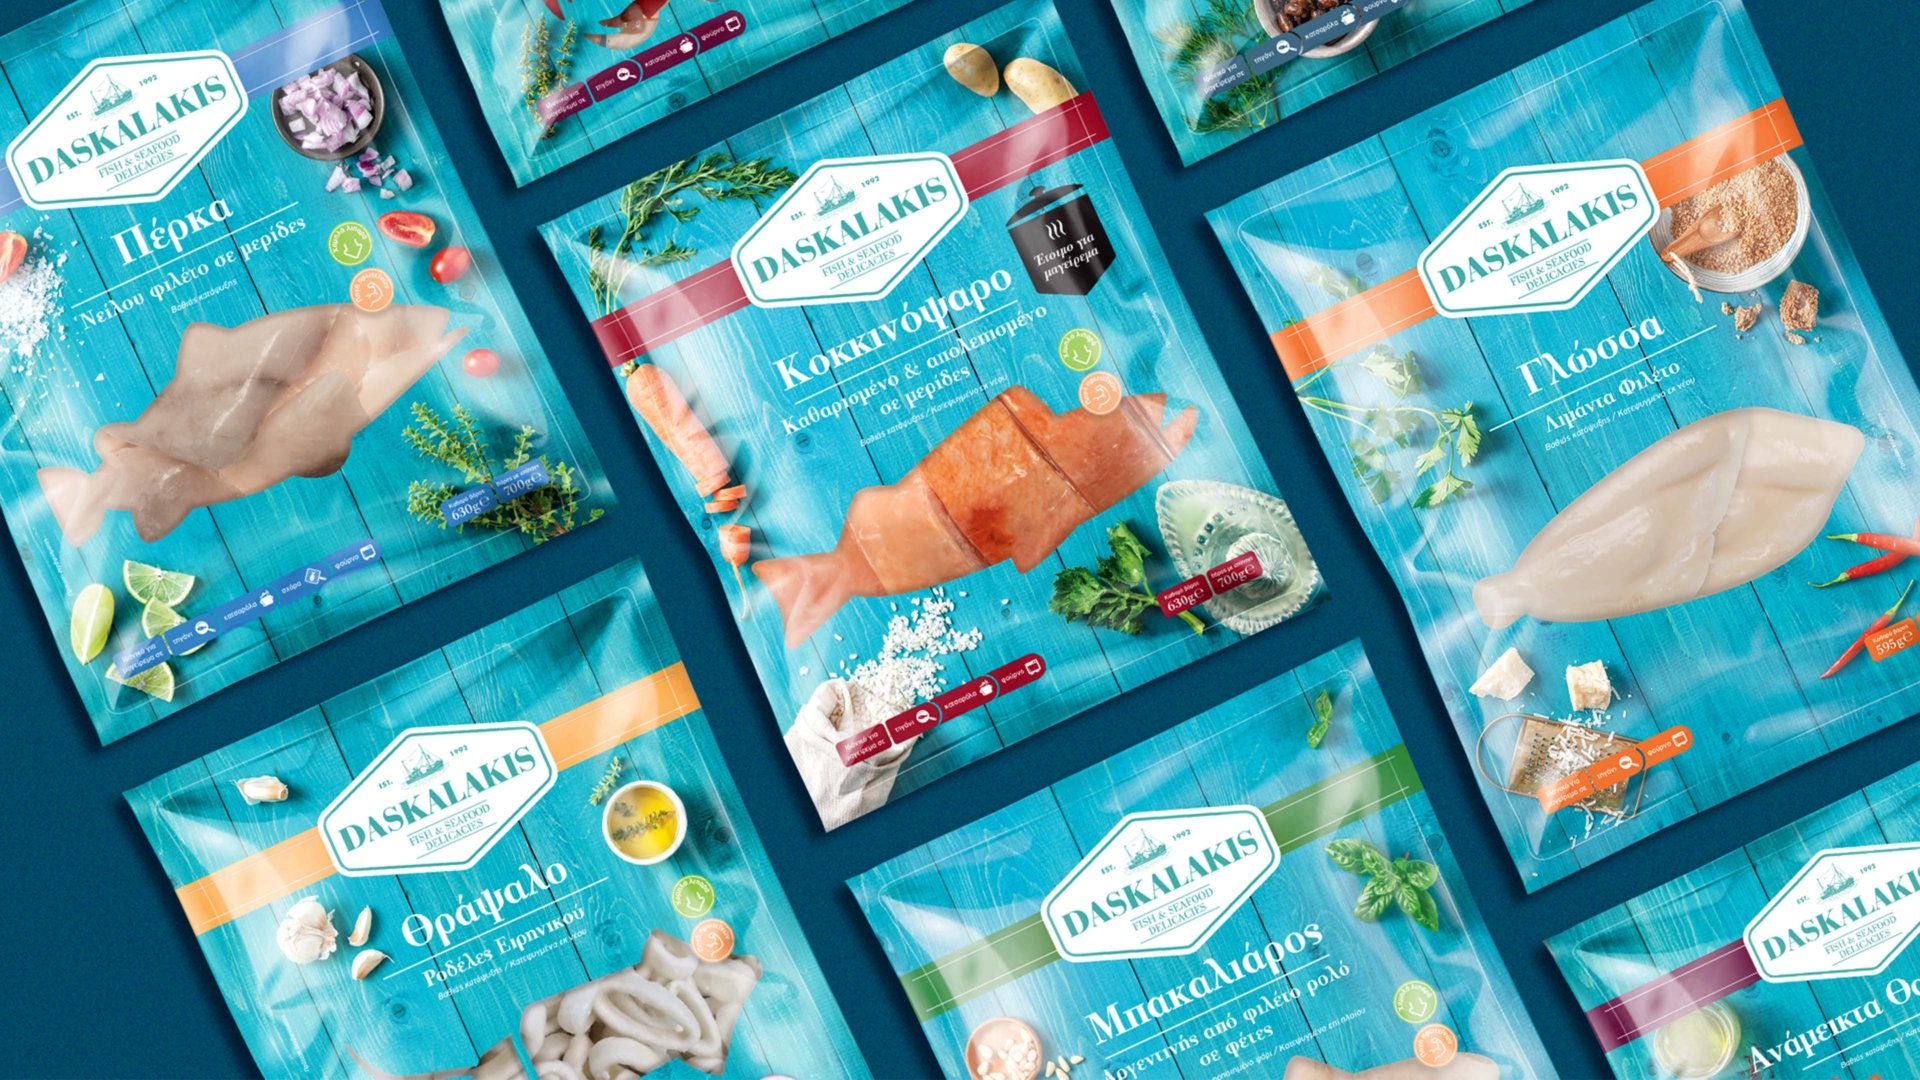 Daskalakis frozen fish and seafood rebranded variants in flowpacks aligned